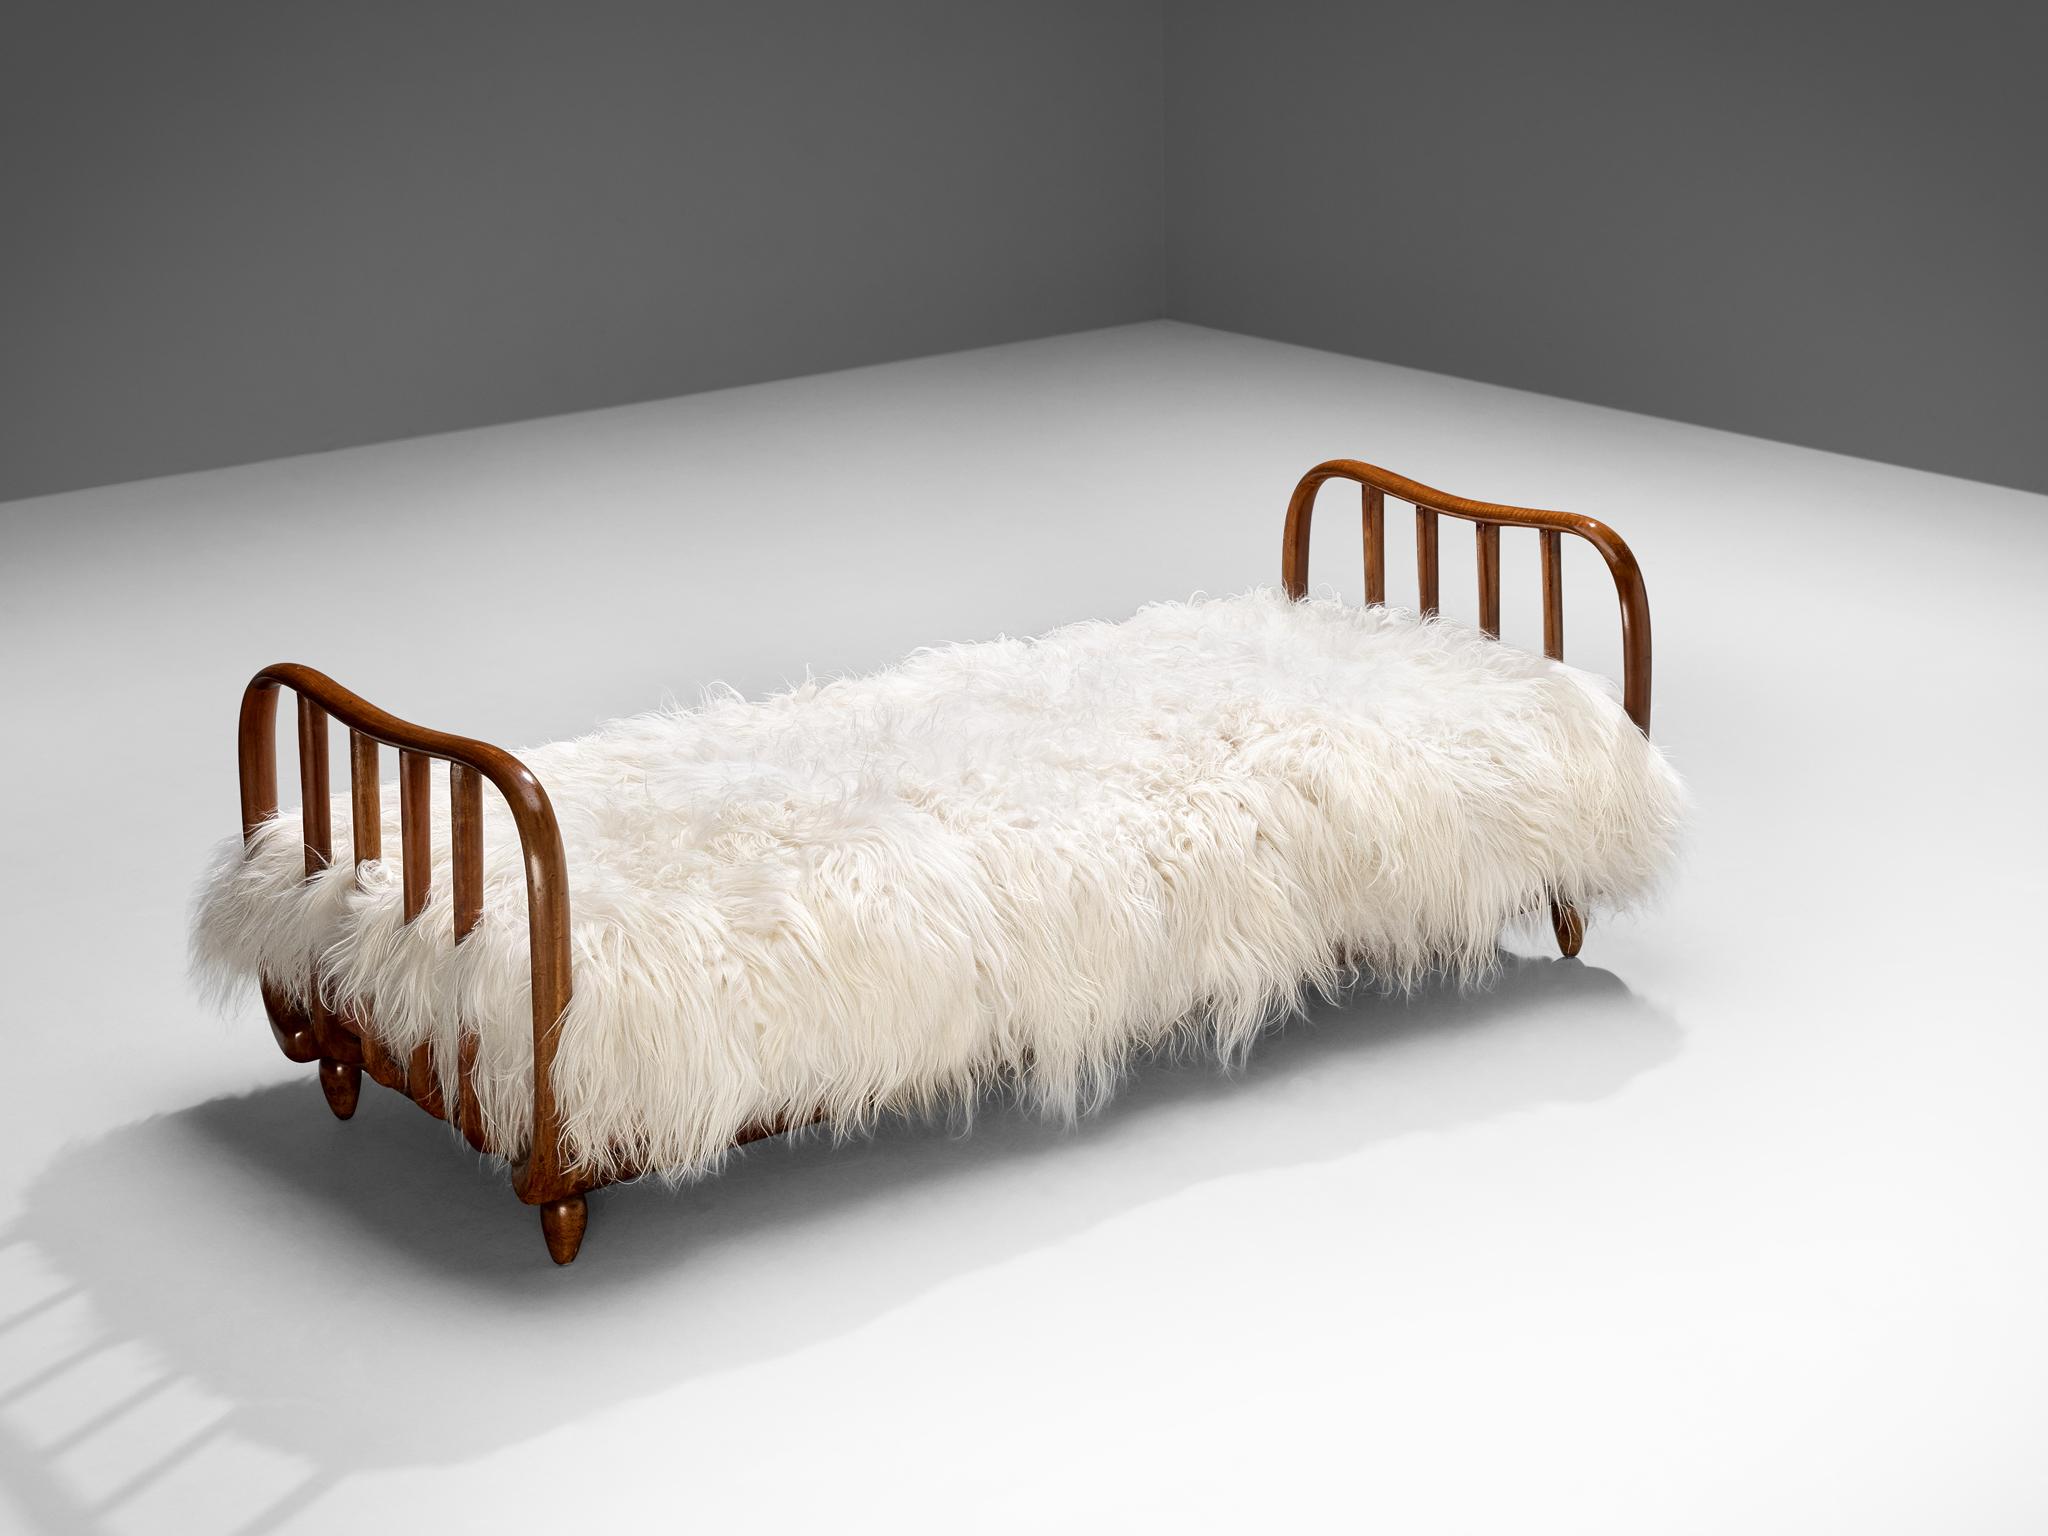 Daybed or bed, walnut, sheepskin, Italy, 1940s

This daybed alludes to the stylistics traits of the artistic Art Deco movement of the 1940s. The whole unit feels unified and simplistic by means of the curved shapes and round edges of the borders and